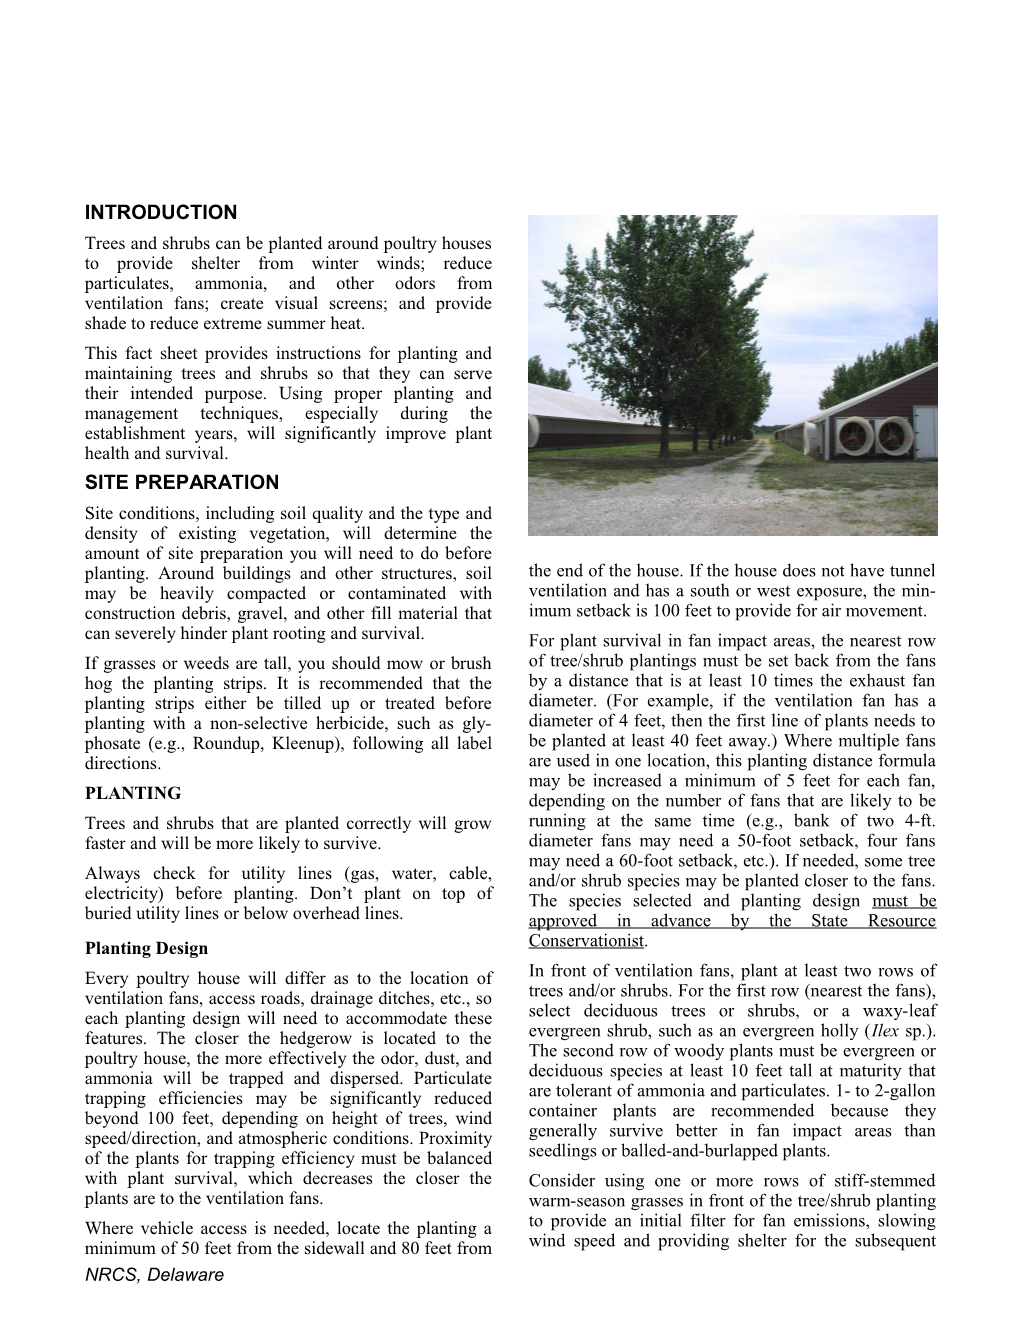 Hedgerow Planting Trees and Shrubs for Poultry Houses Fact Sheet - 1